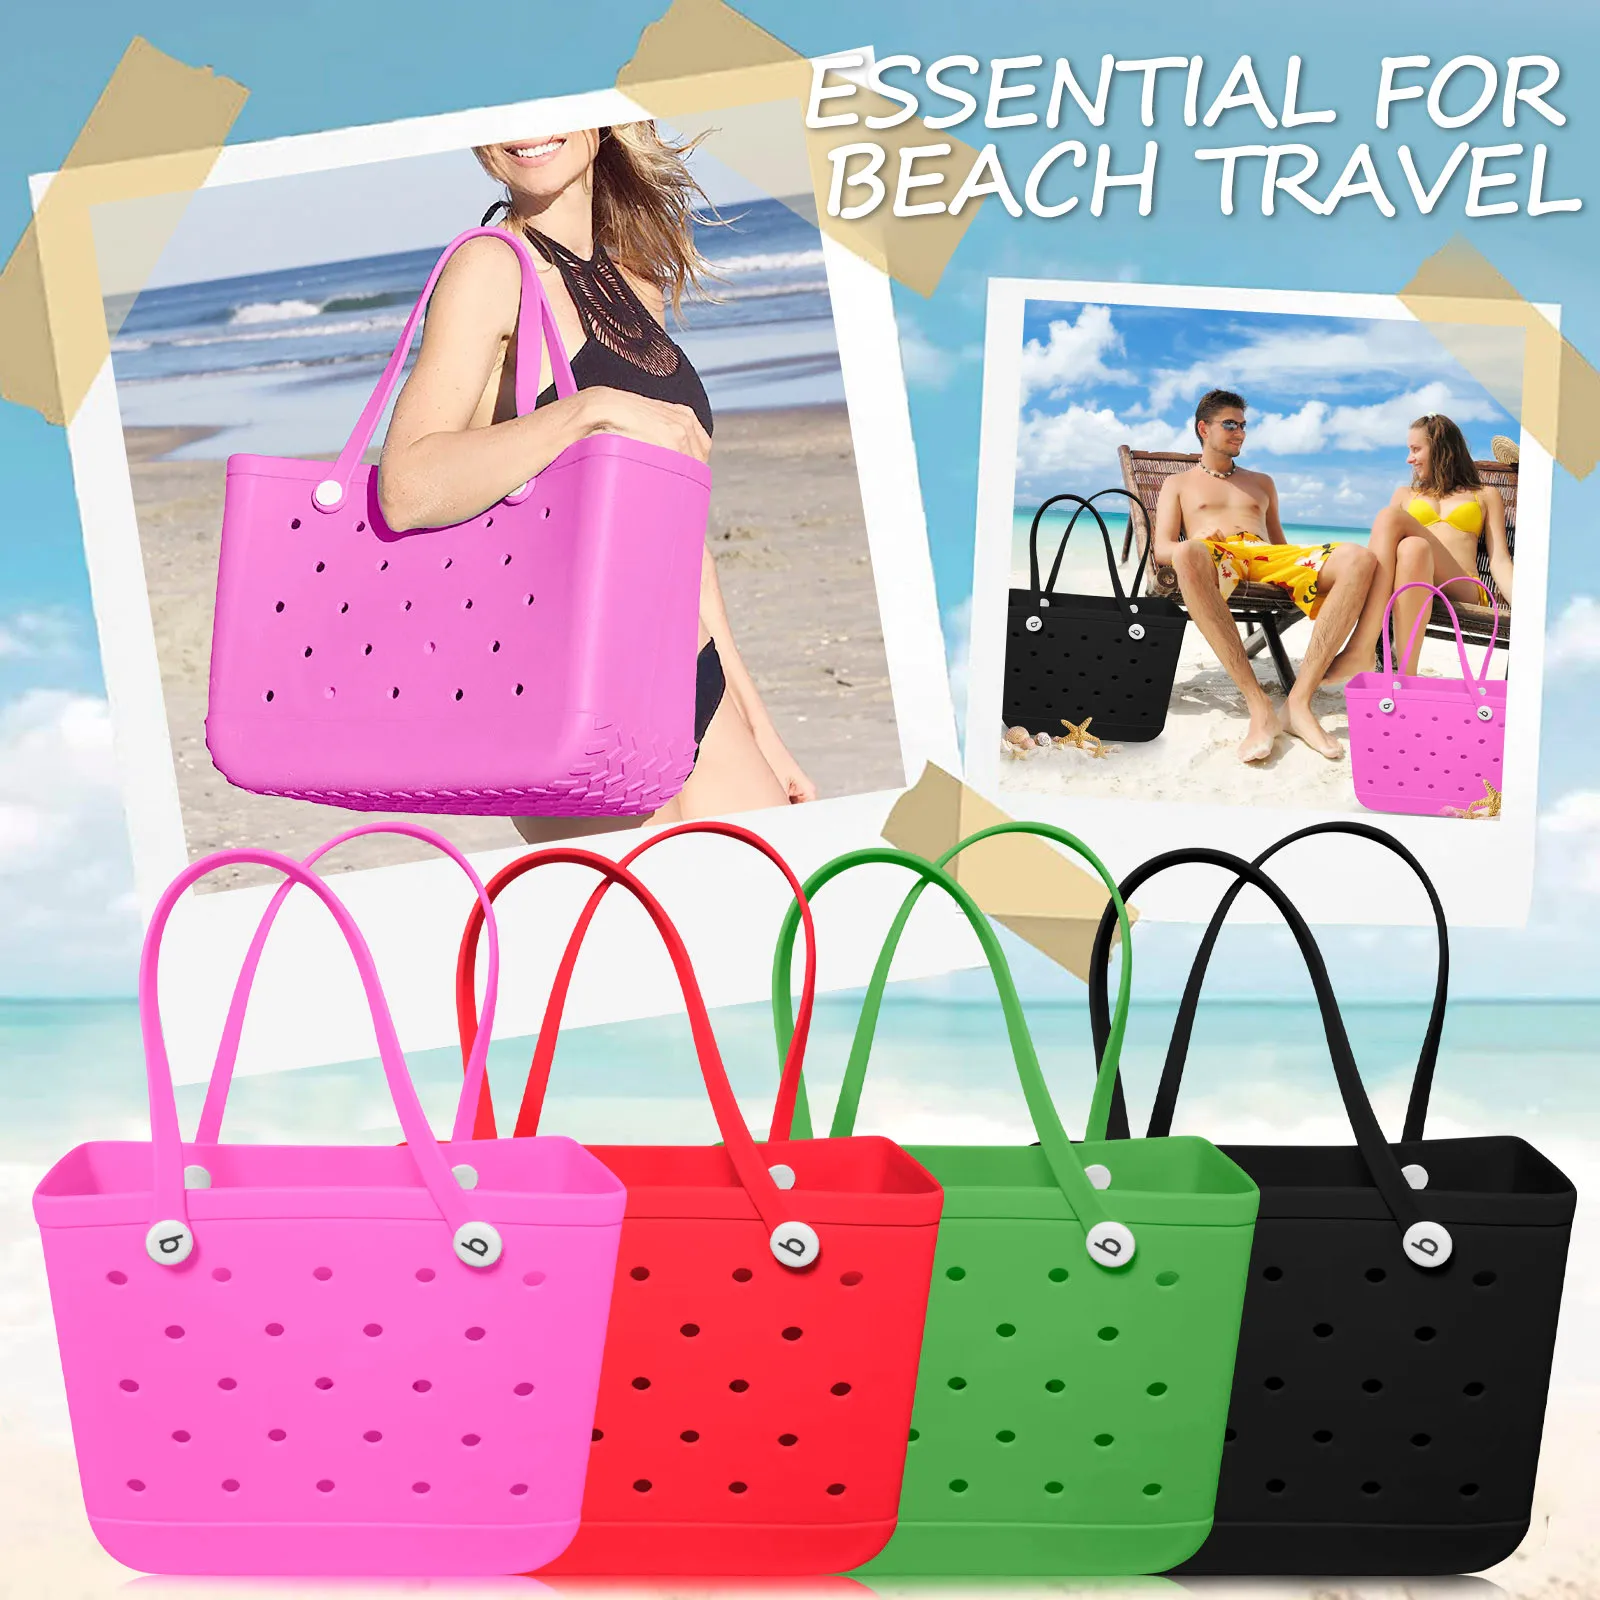 https://ae01.alicdn.com/kf/Sd86e4aa6eae741d493616fd64d5a458aJ/38-48cm-Rubber-Beach-Bags-EVA-with-Hole-Waterproof-Sandproof-Durable-Open-Silicone-Tote-Bag-for.jpg